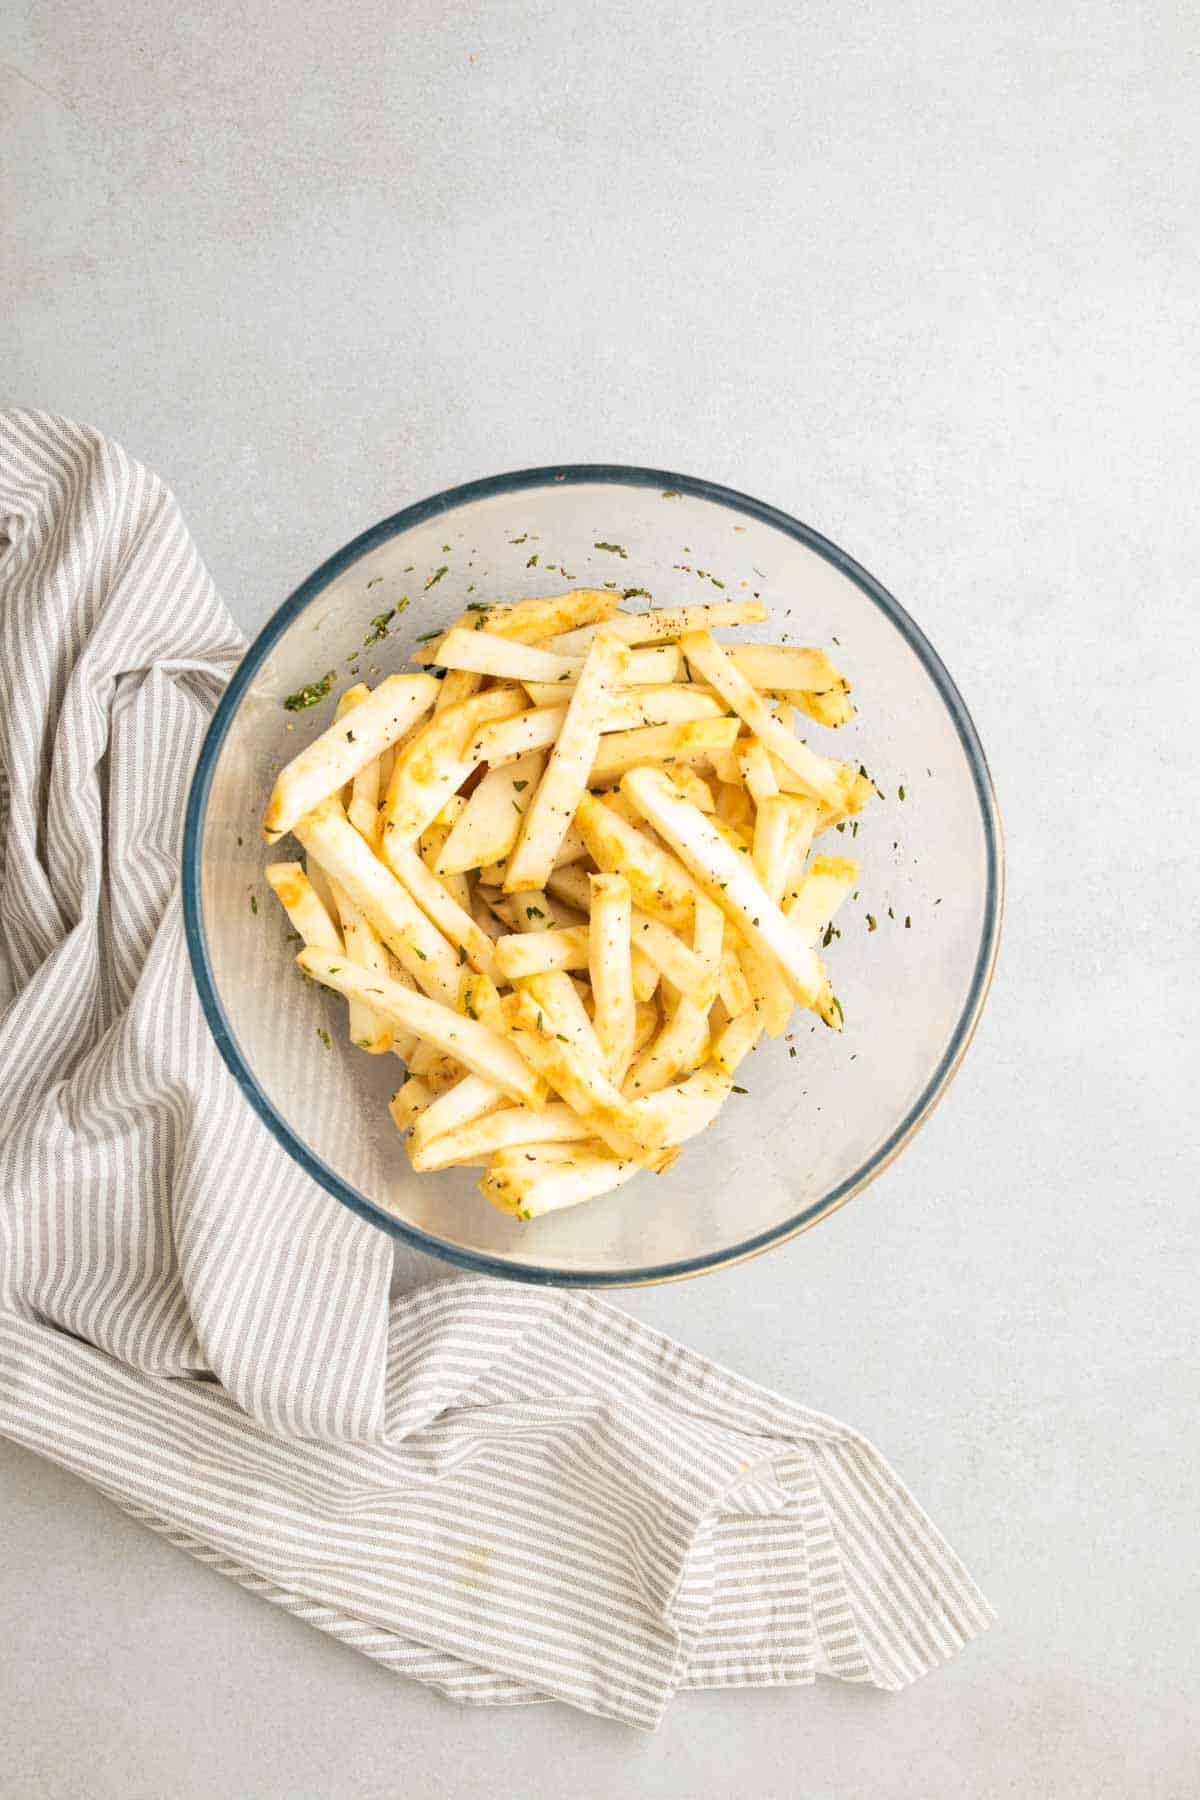 Fries tossed in oil and rosemary in a glass bowl, as seen from above